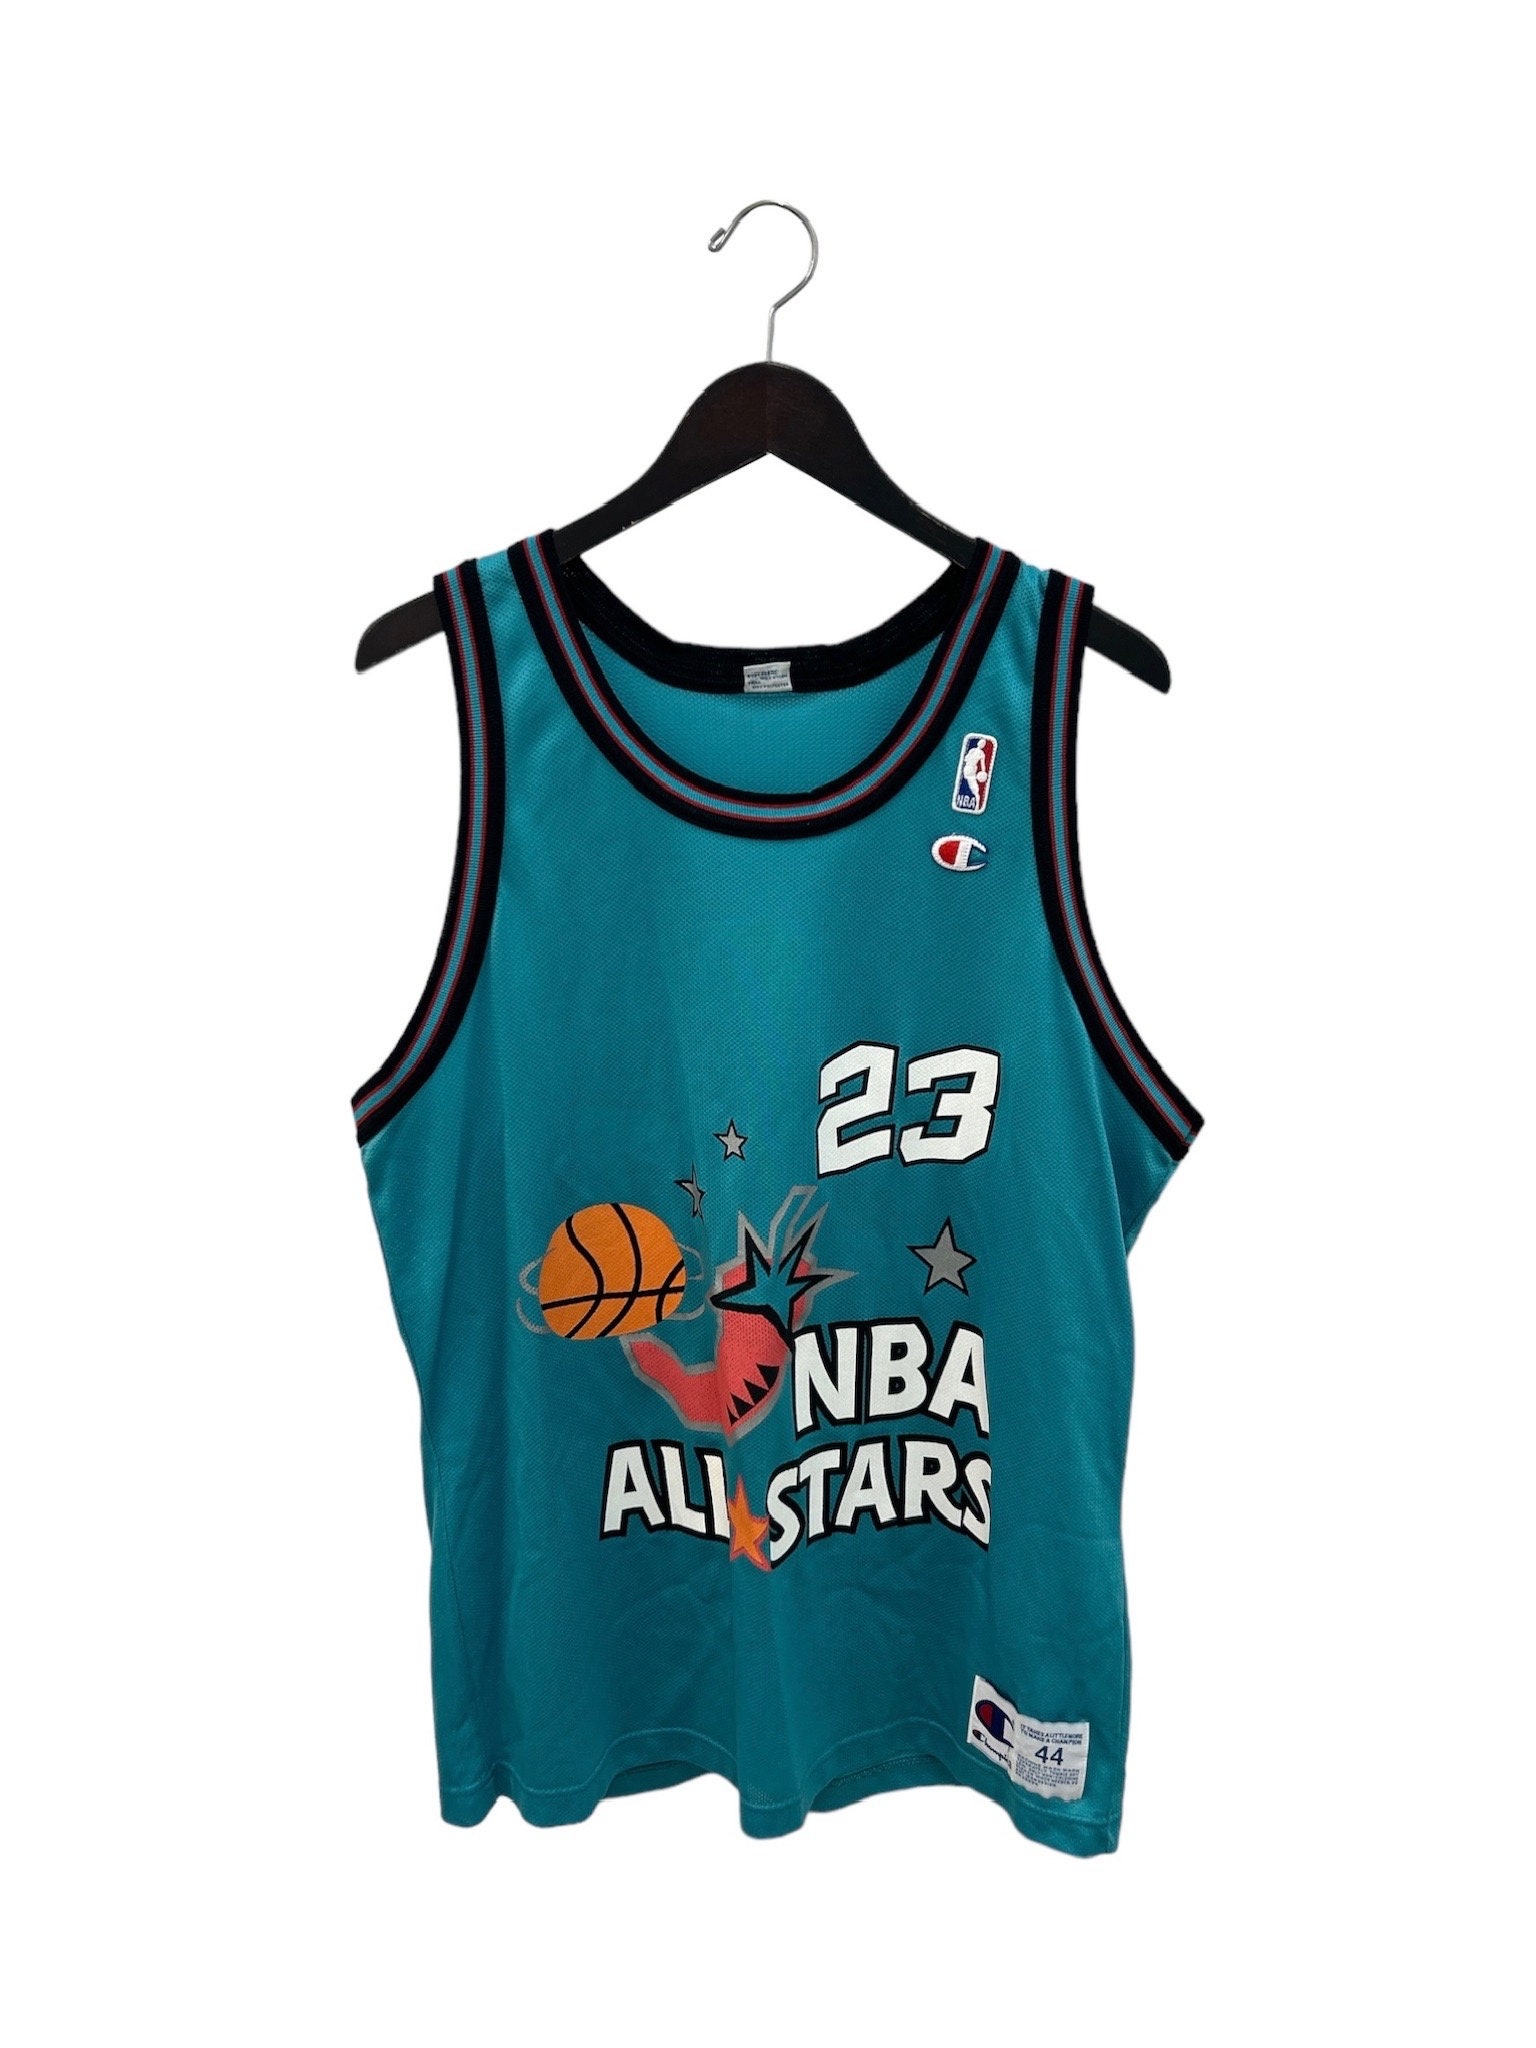 1996 Nba All Star Jersey Mourning XXL 100% AUTHENTIC Adidas